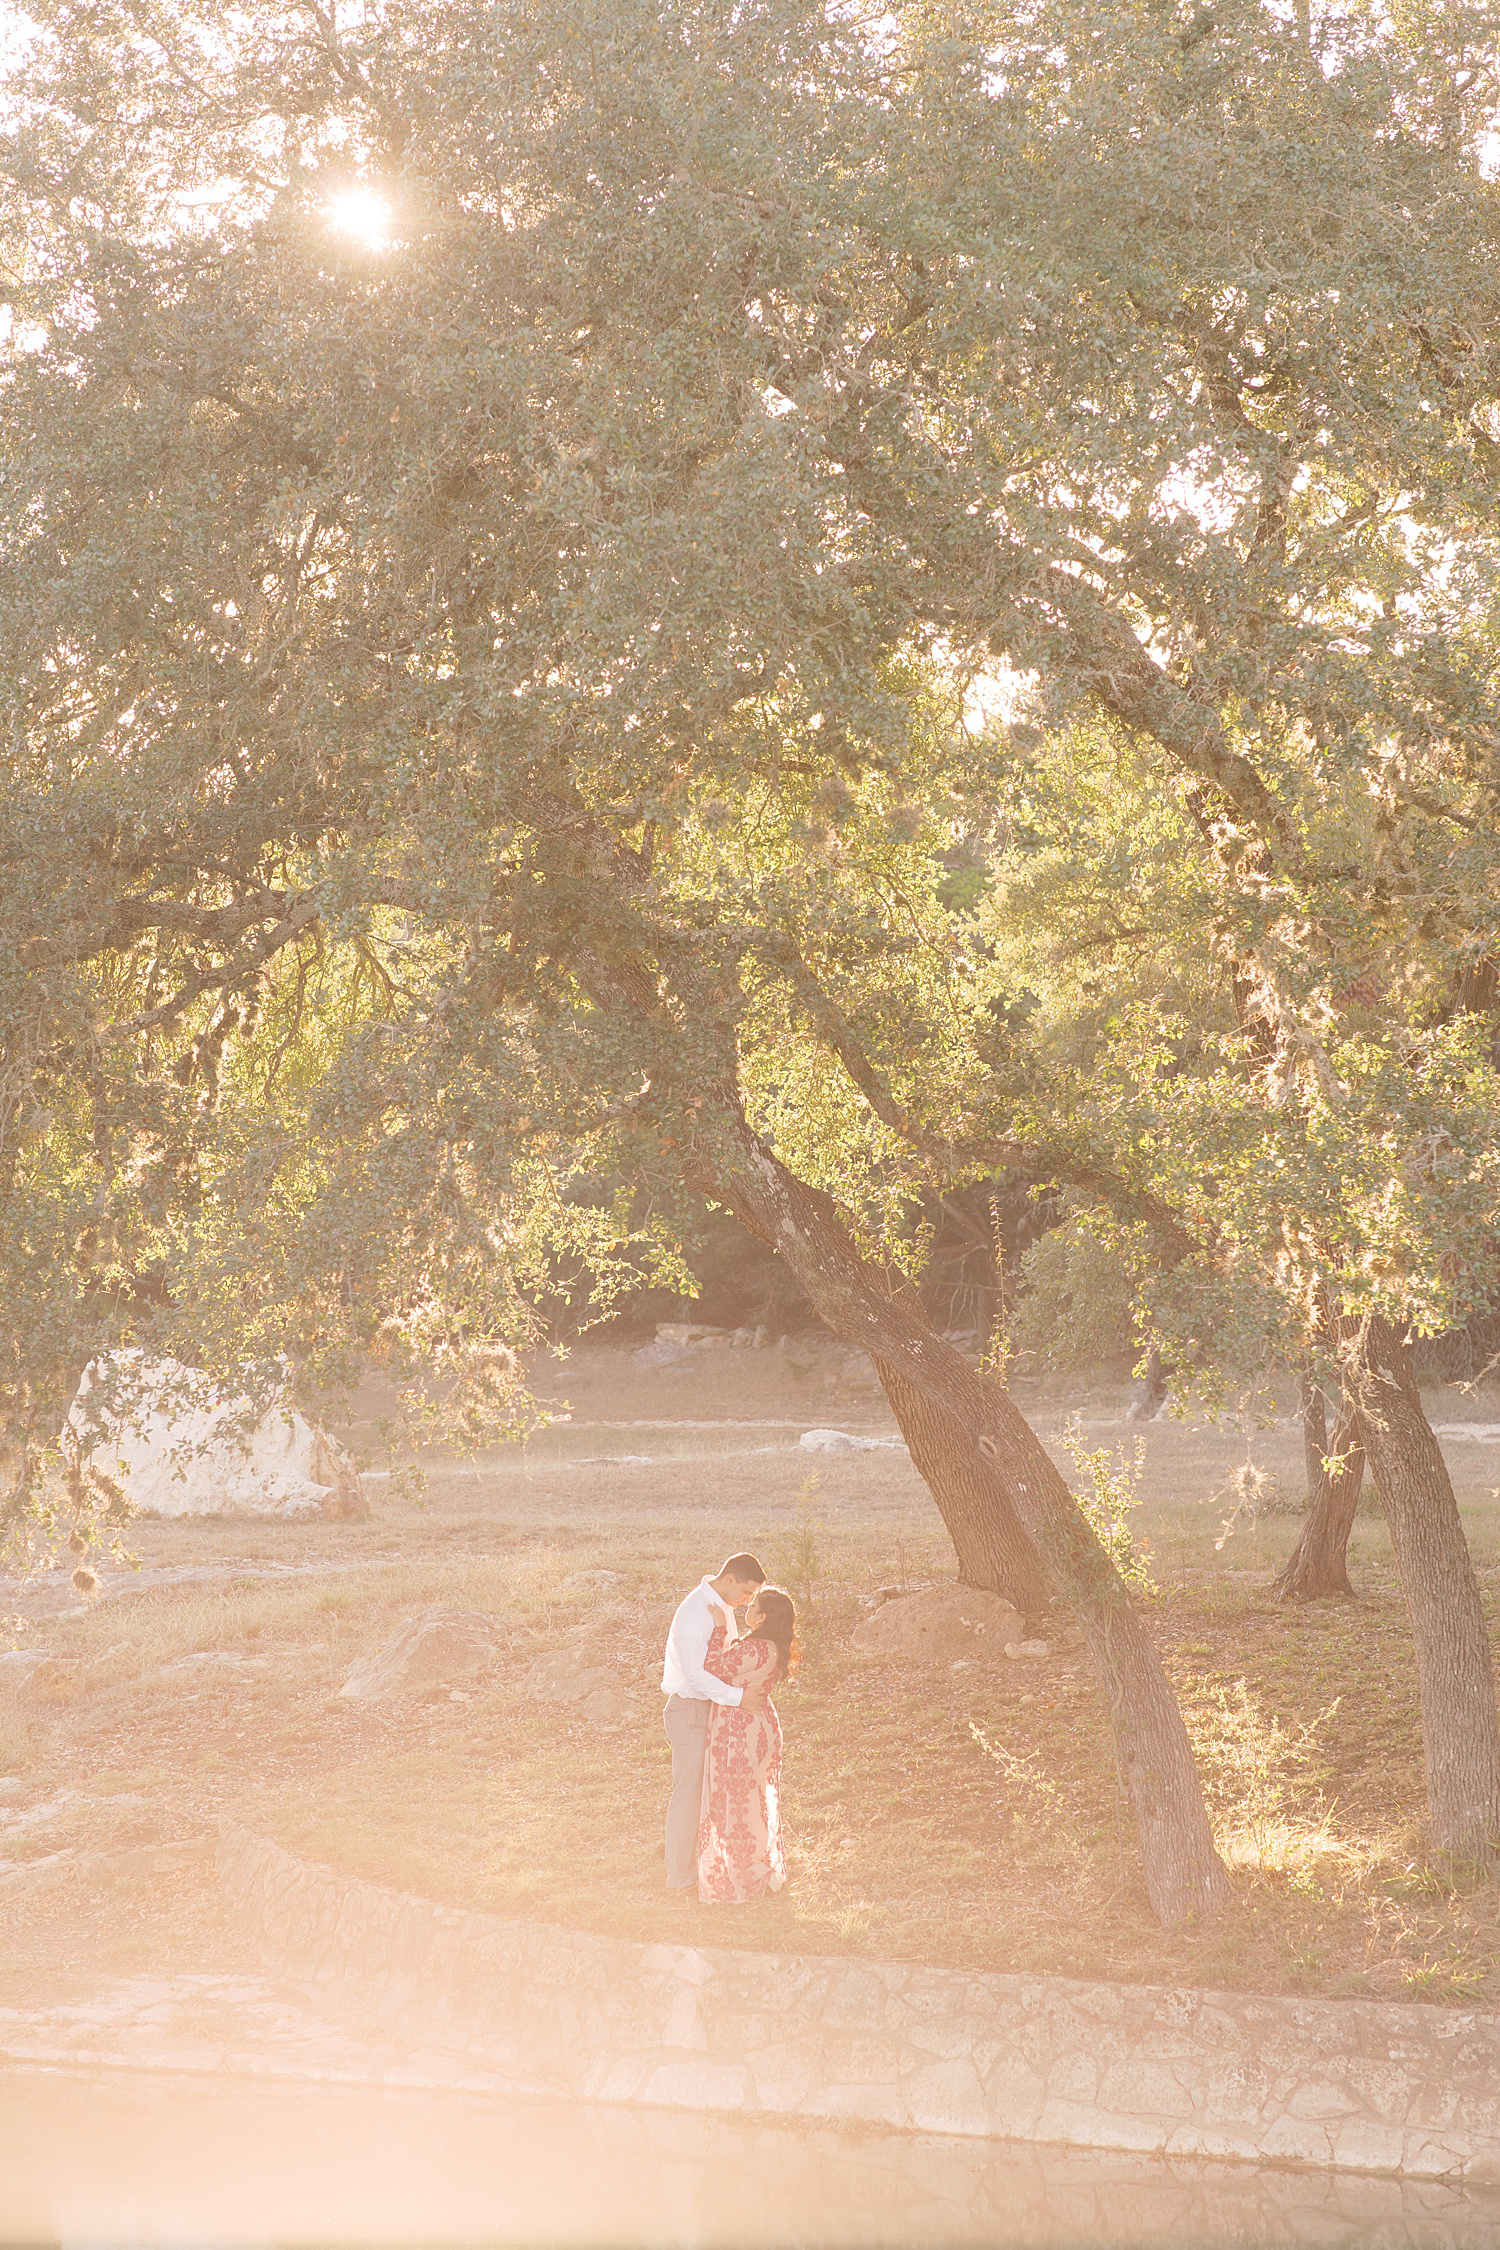 couple standing under a tree in front of a lake with golden light for a Romantic Engagement session at Kendall Plantation with Monica Roberts Photography www.monicaroberts.com